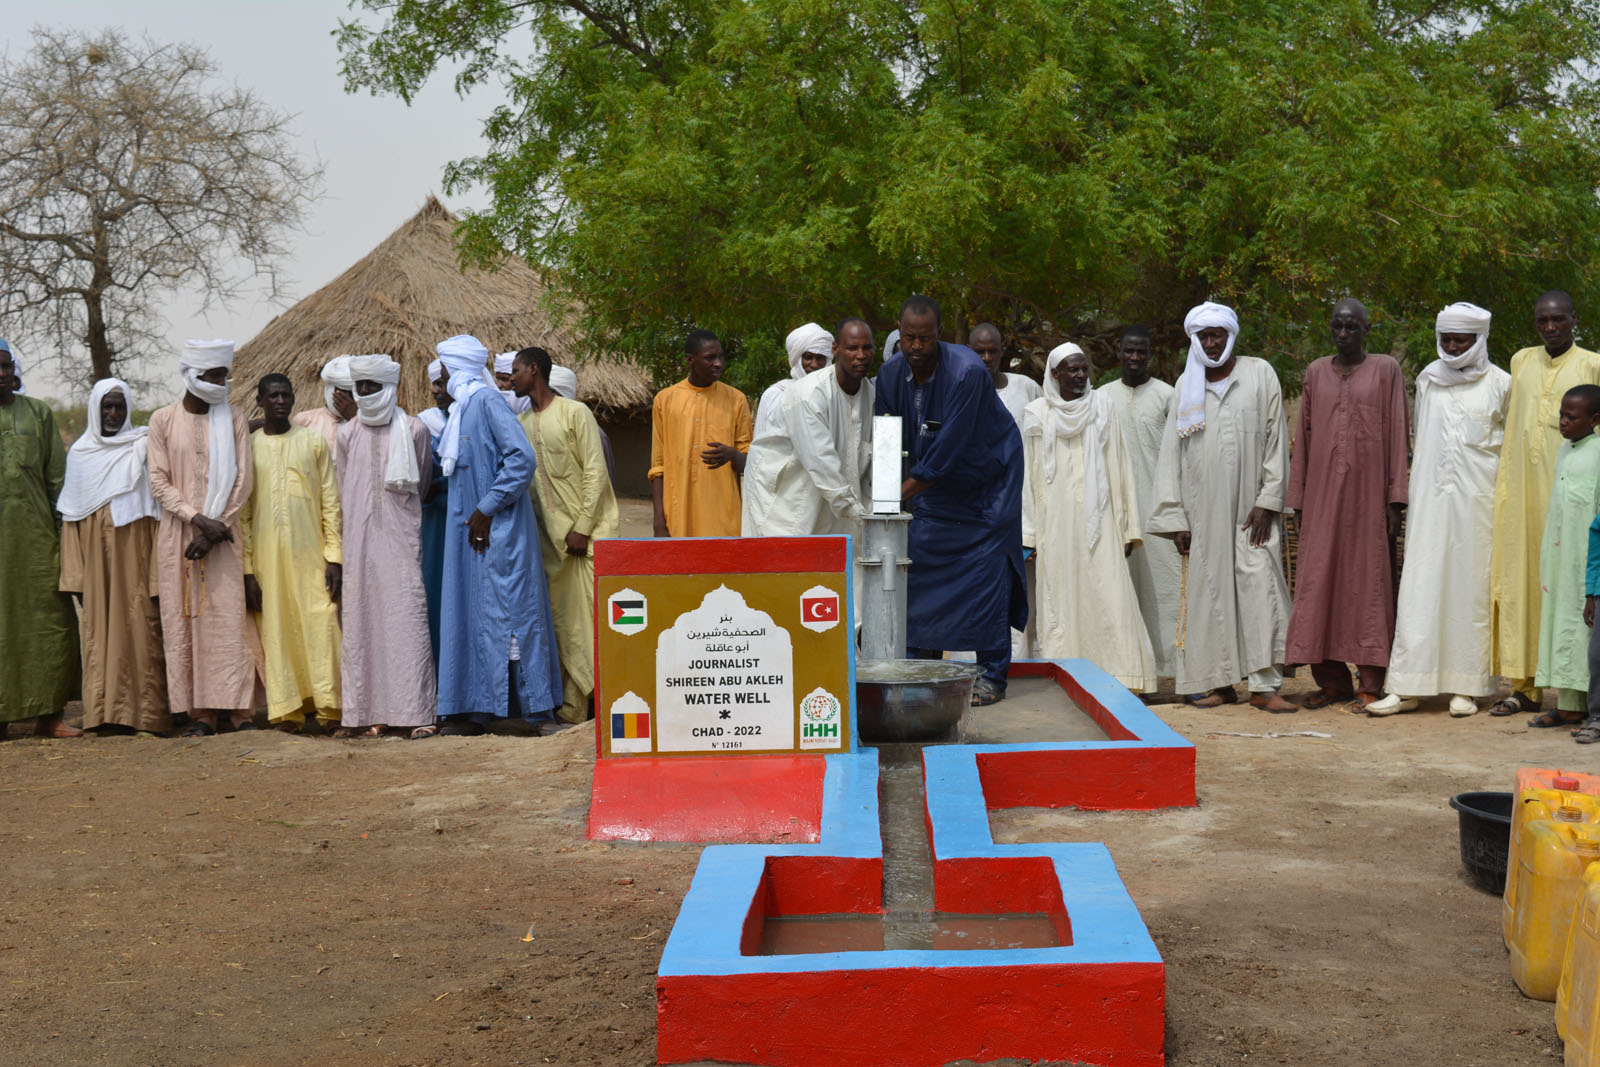 A water well named after Shireen Abu Akleh was opened in Chad